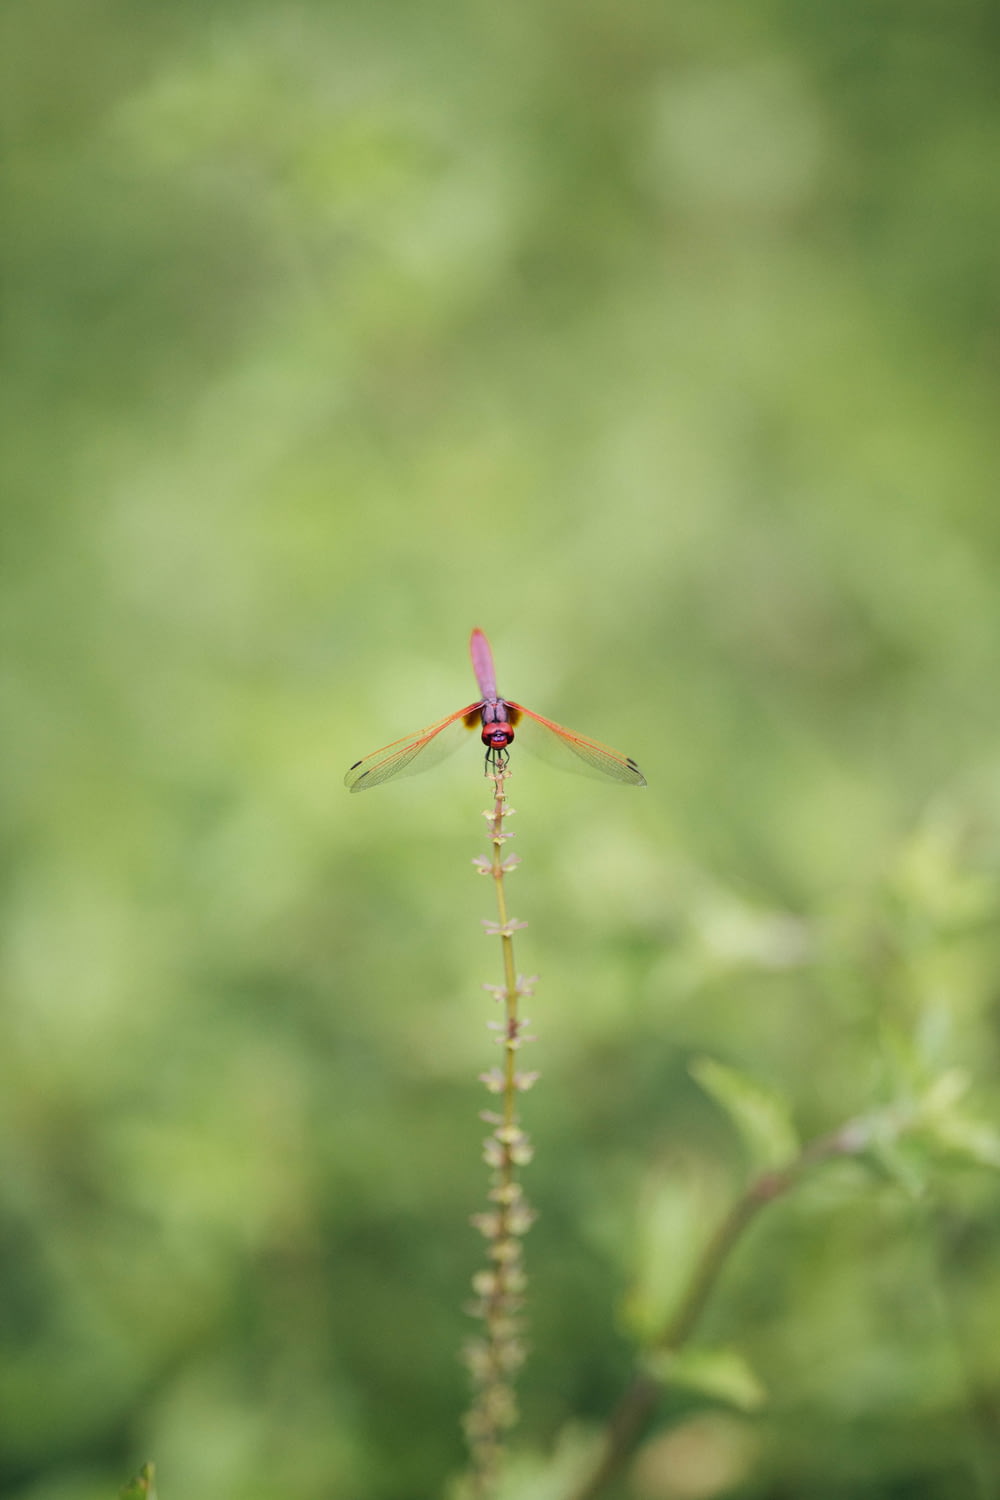 red dragonfly perched on green grass in close up photography during daytime